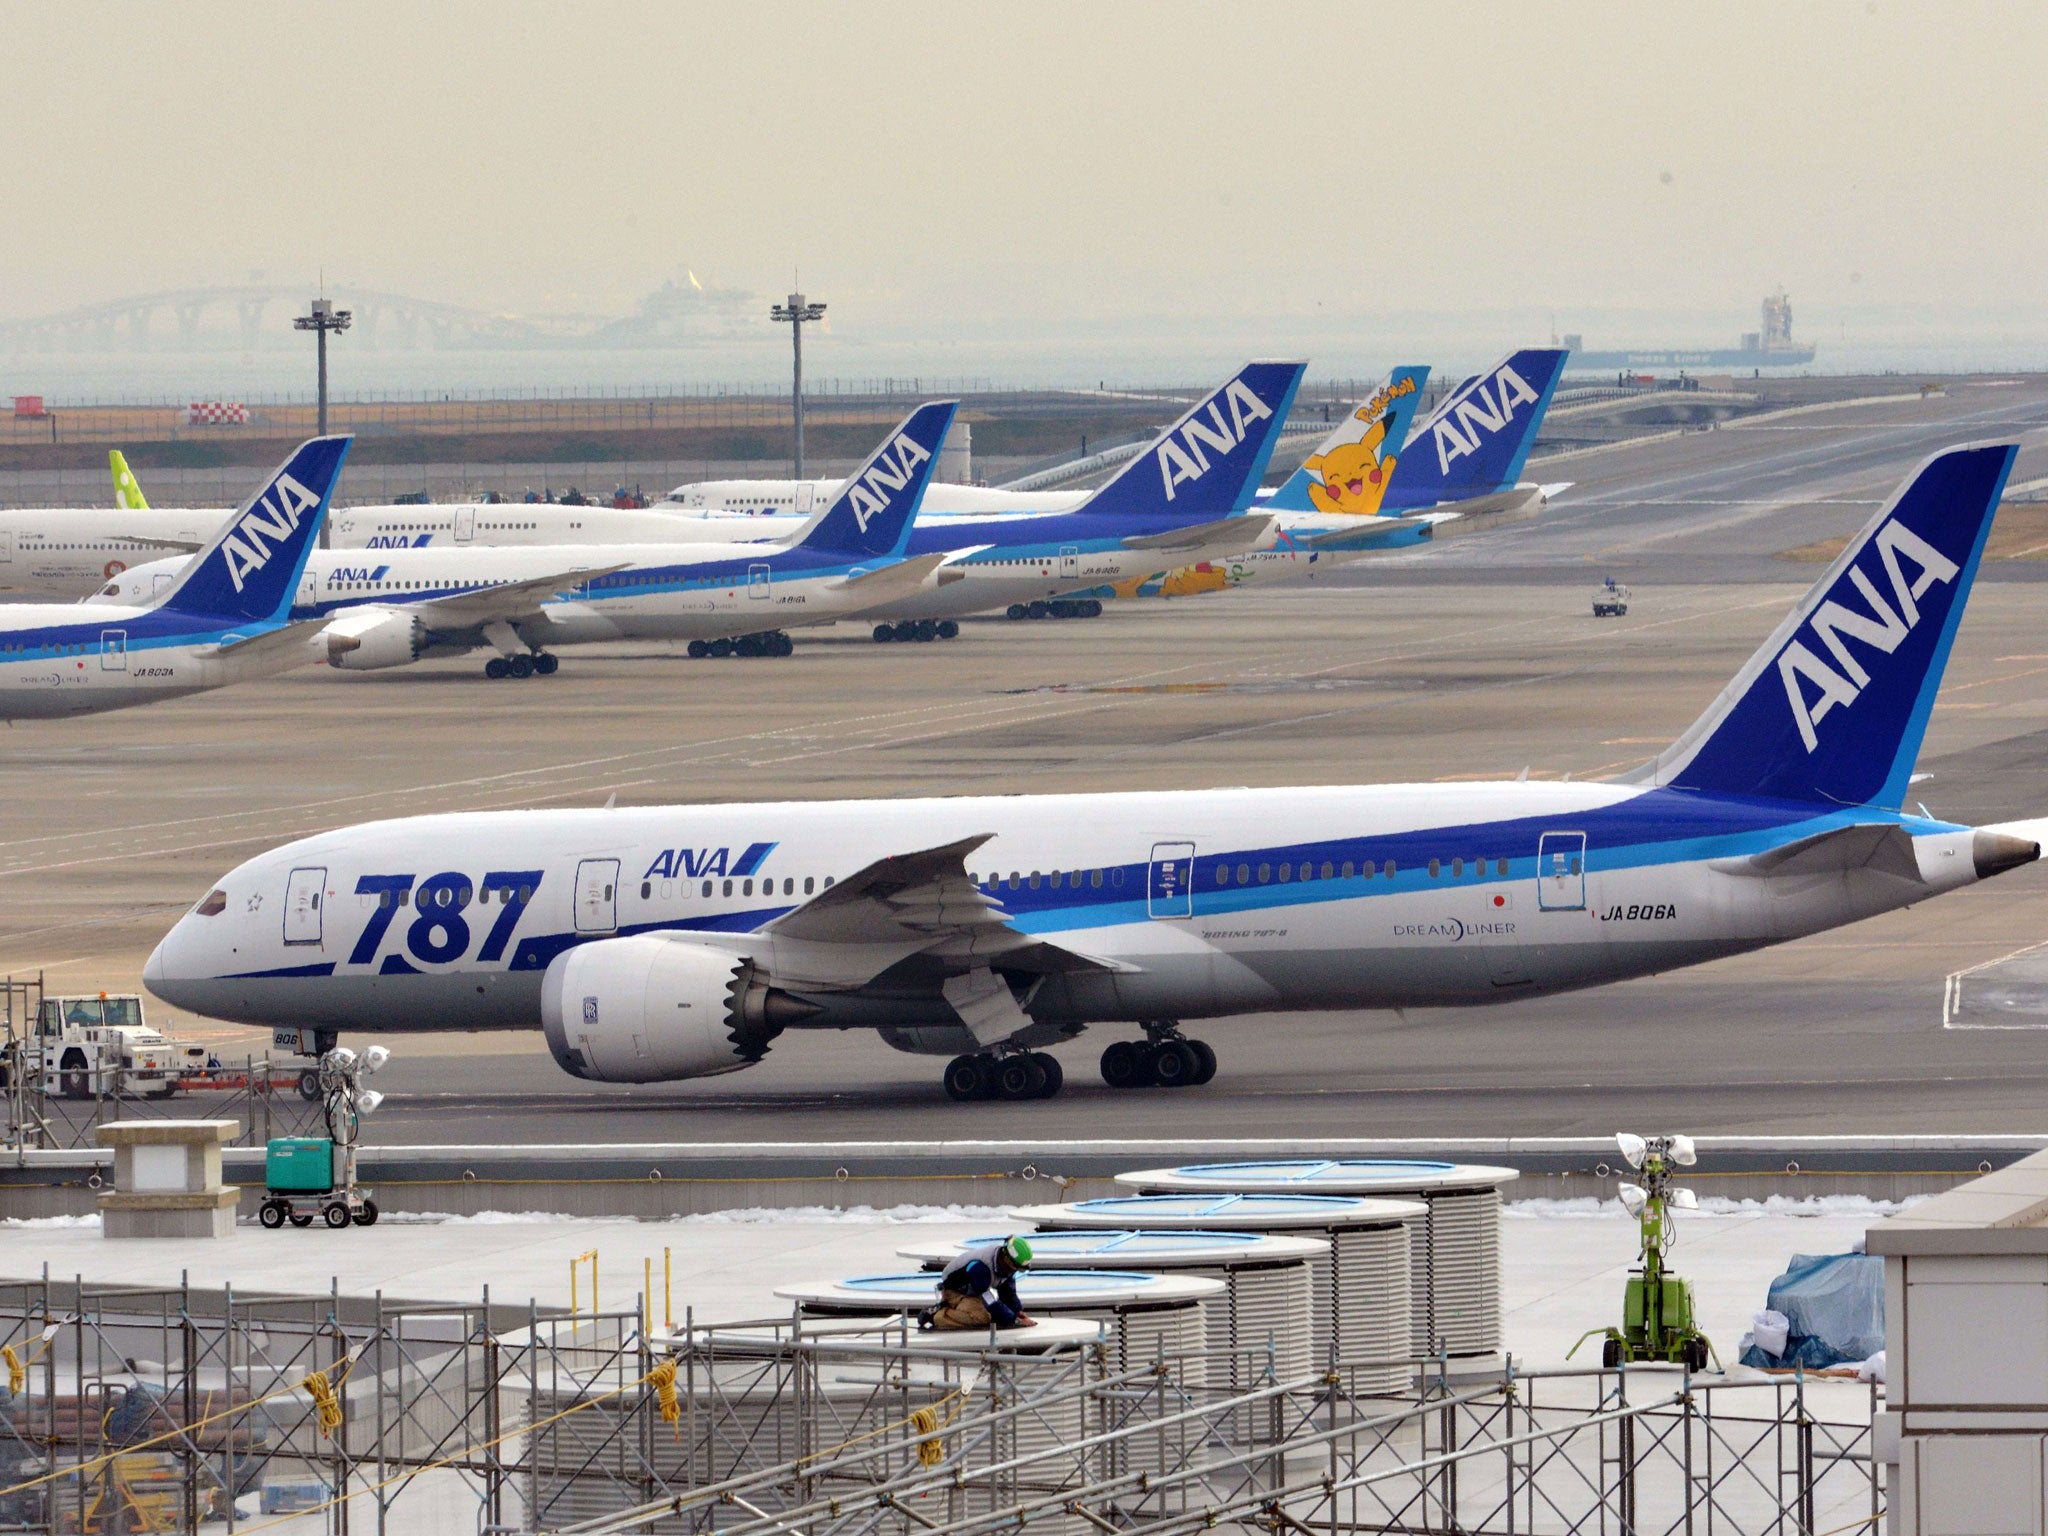 Japan's major airlines grounded their Boeing 787 planes for safety checks today